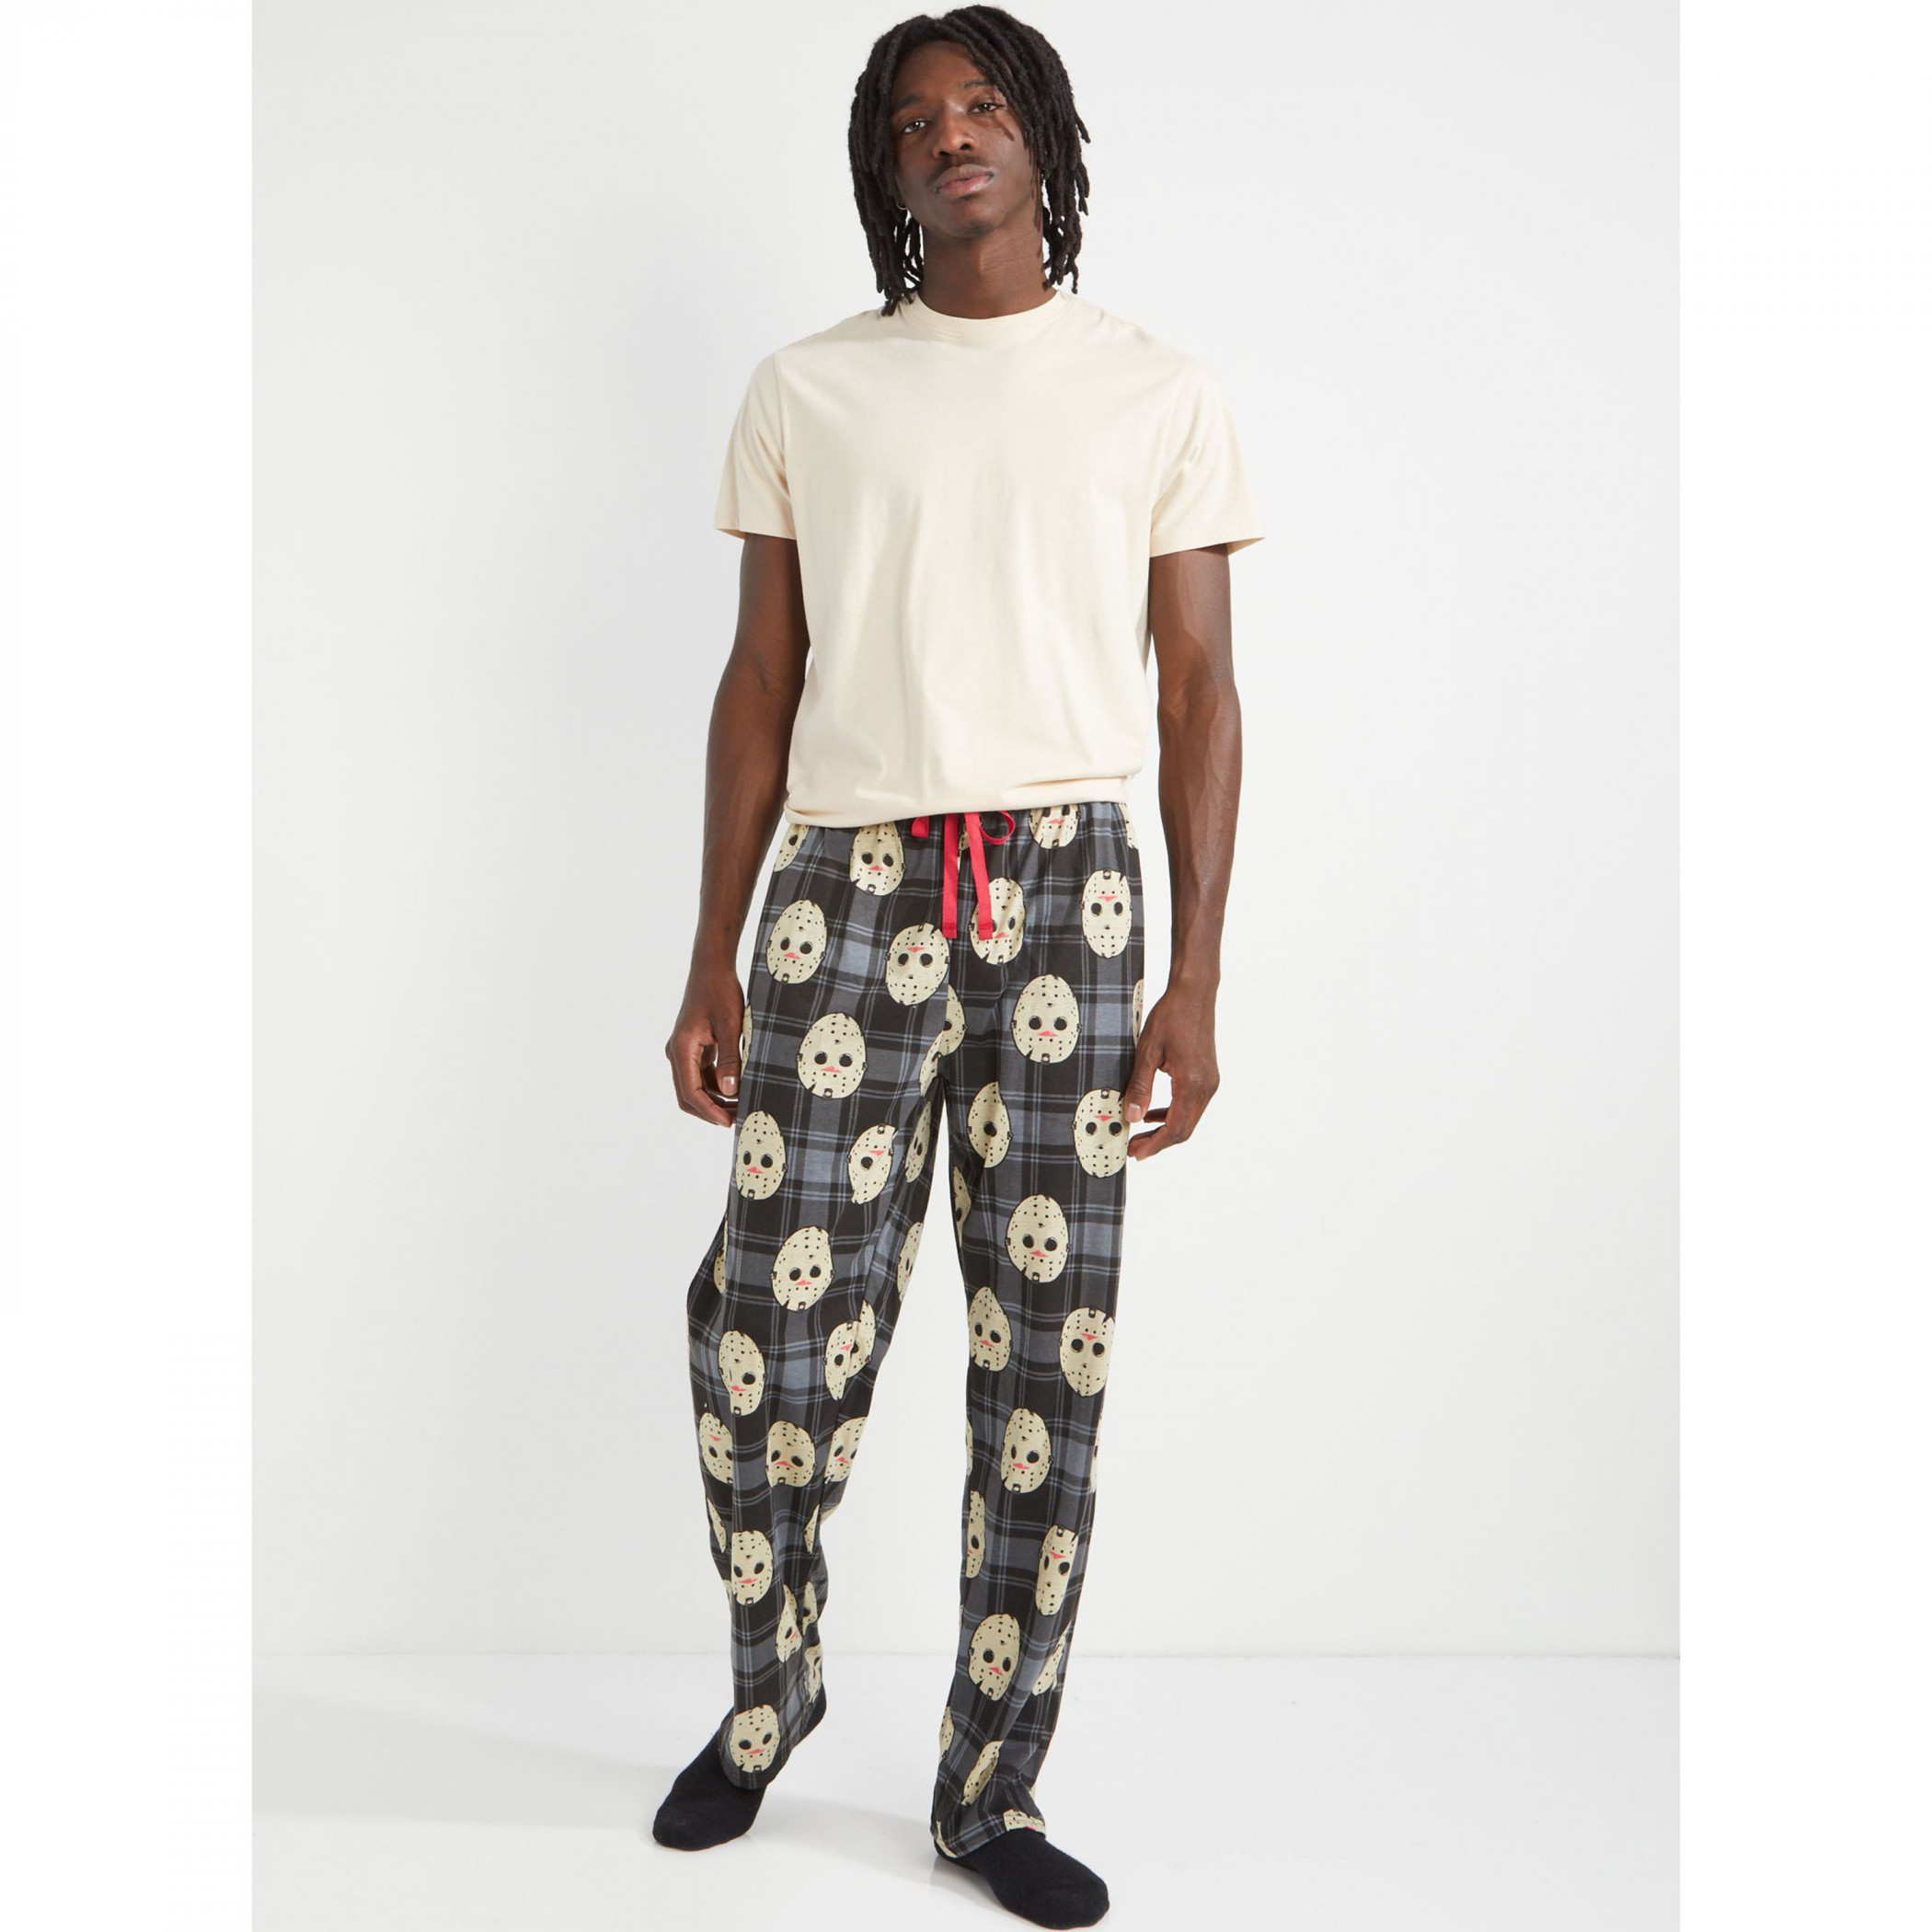 Friday the 13th Jason Voorhees Mask All Over Print Sleep Pants